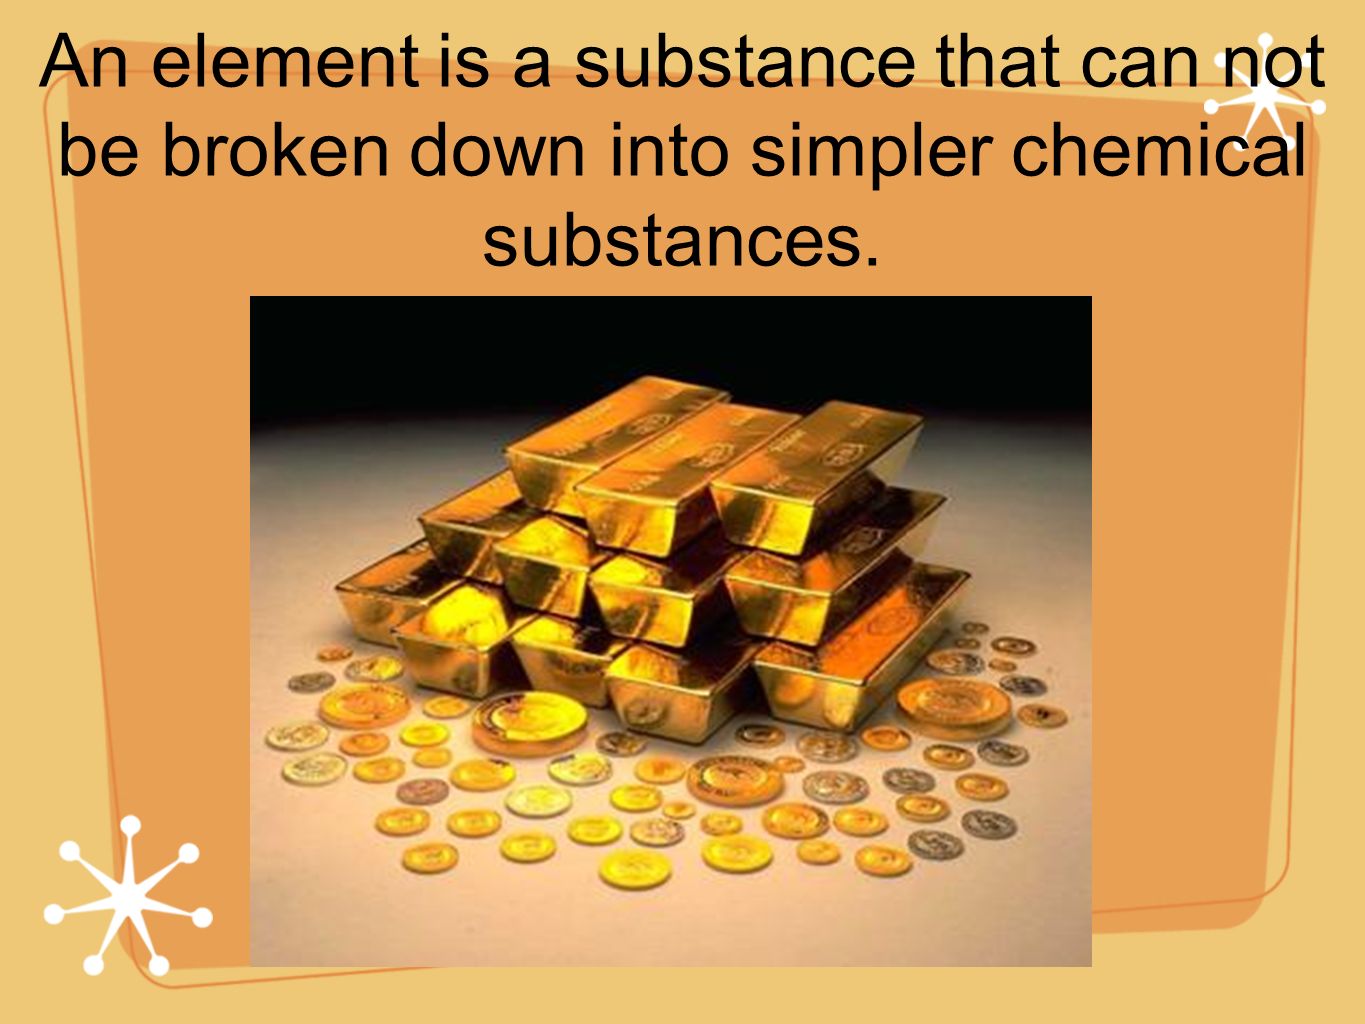 An element is a substance that can not be broken down into simpler chemical substances.